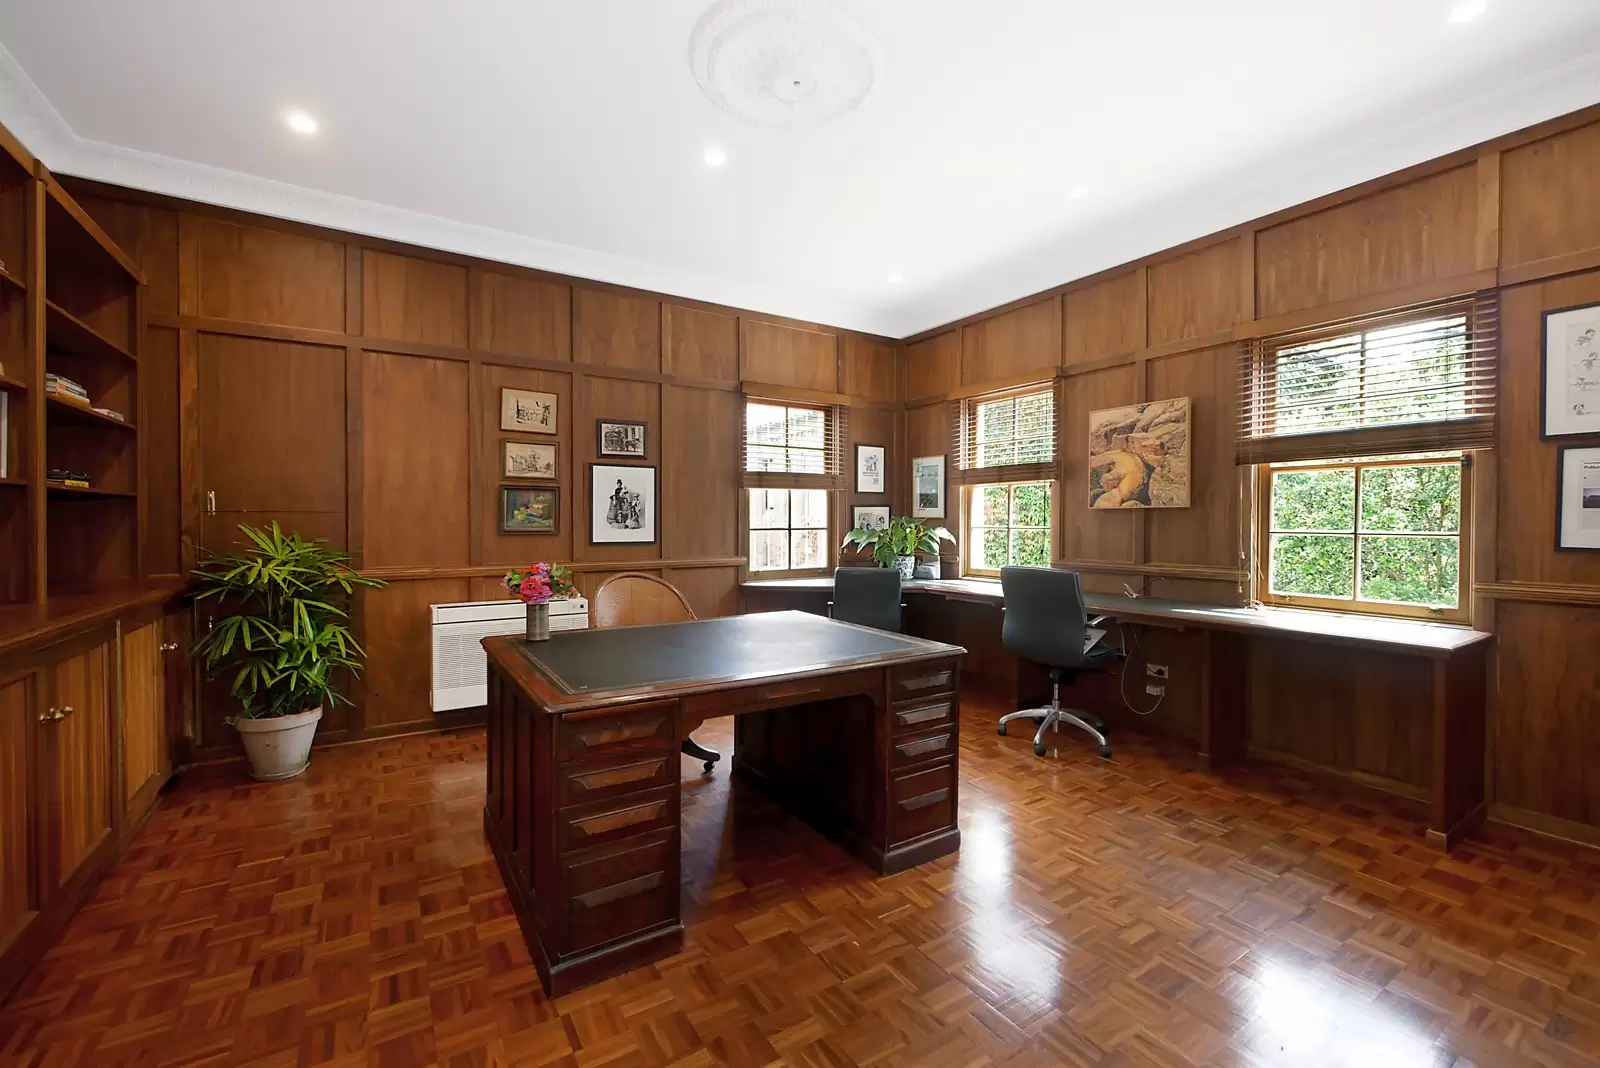 Photo #11: 56 Cranbrook Road, Bellevue Hill - Sold by Sydney Sotheby's International Realty